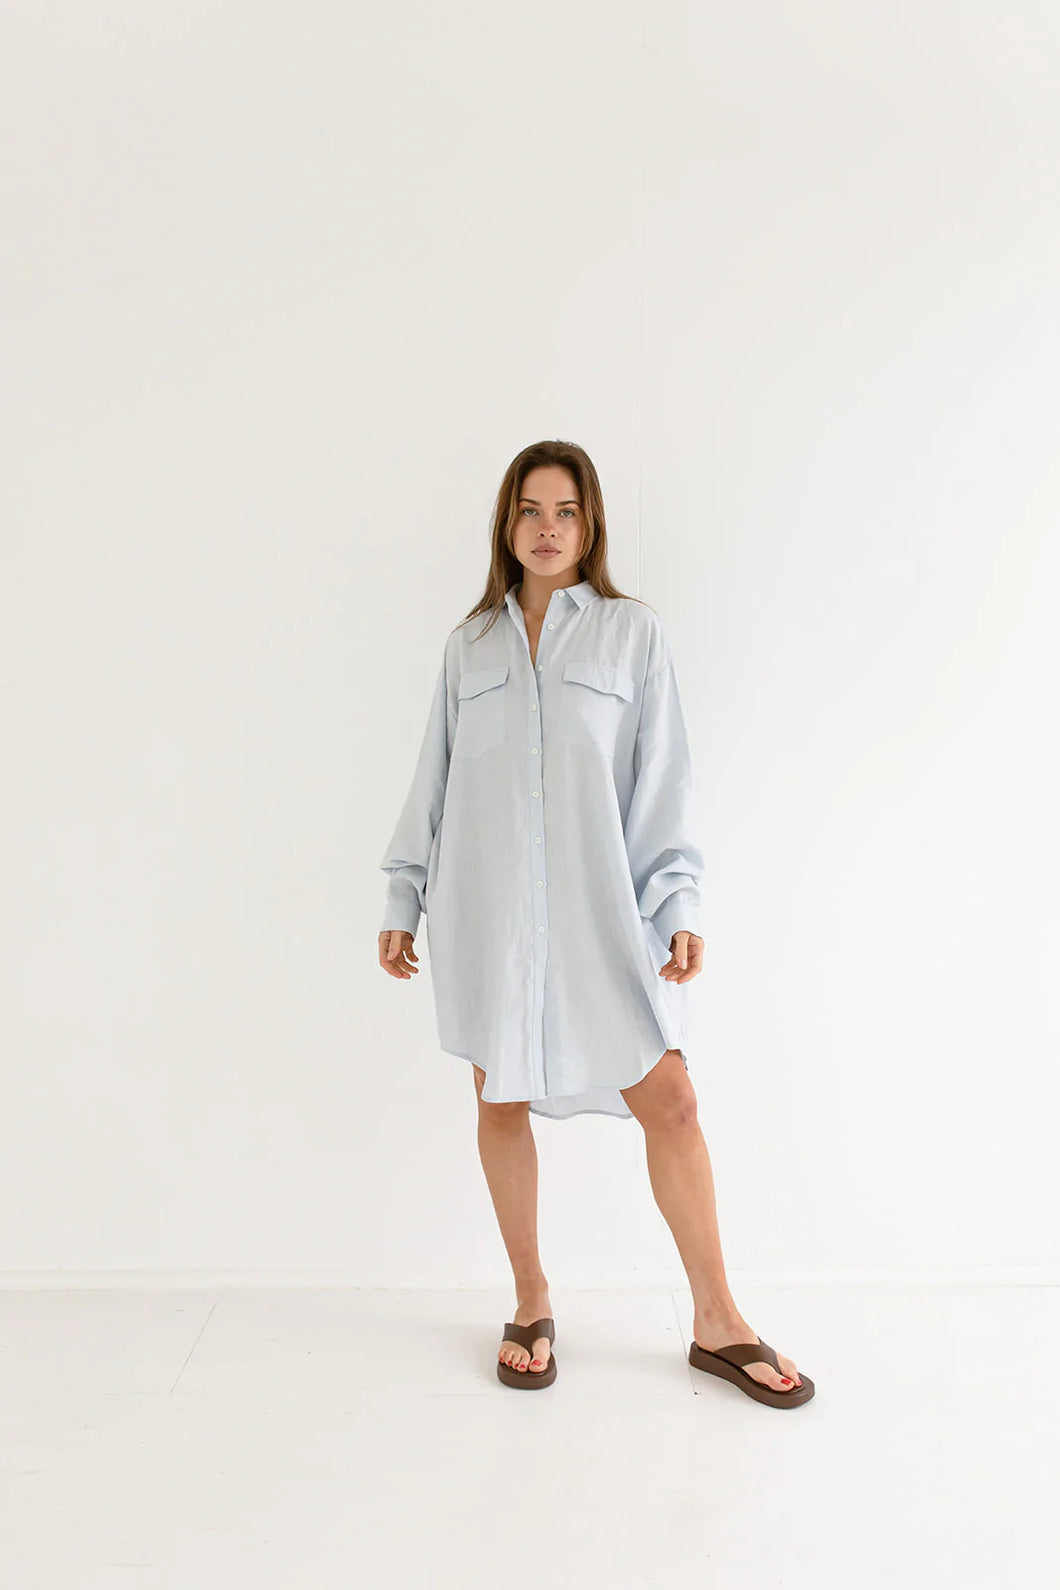 The Oversized Shirt in Powder Blue